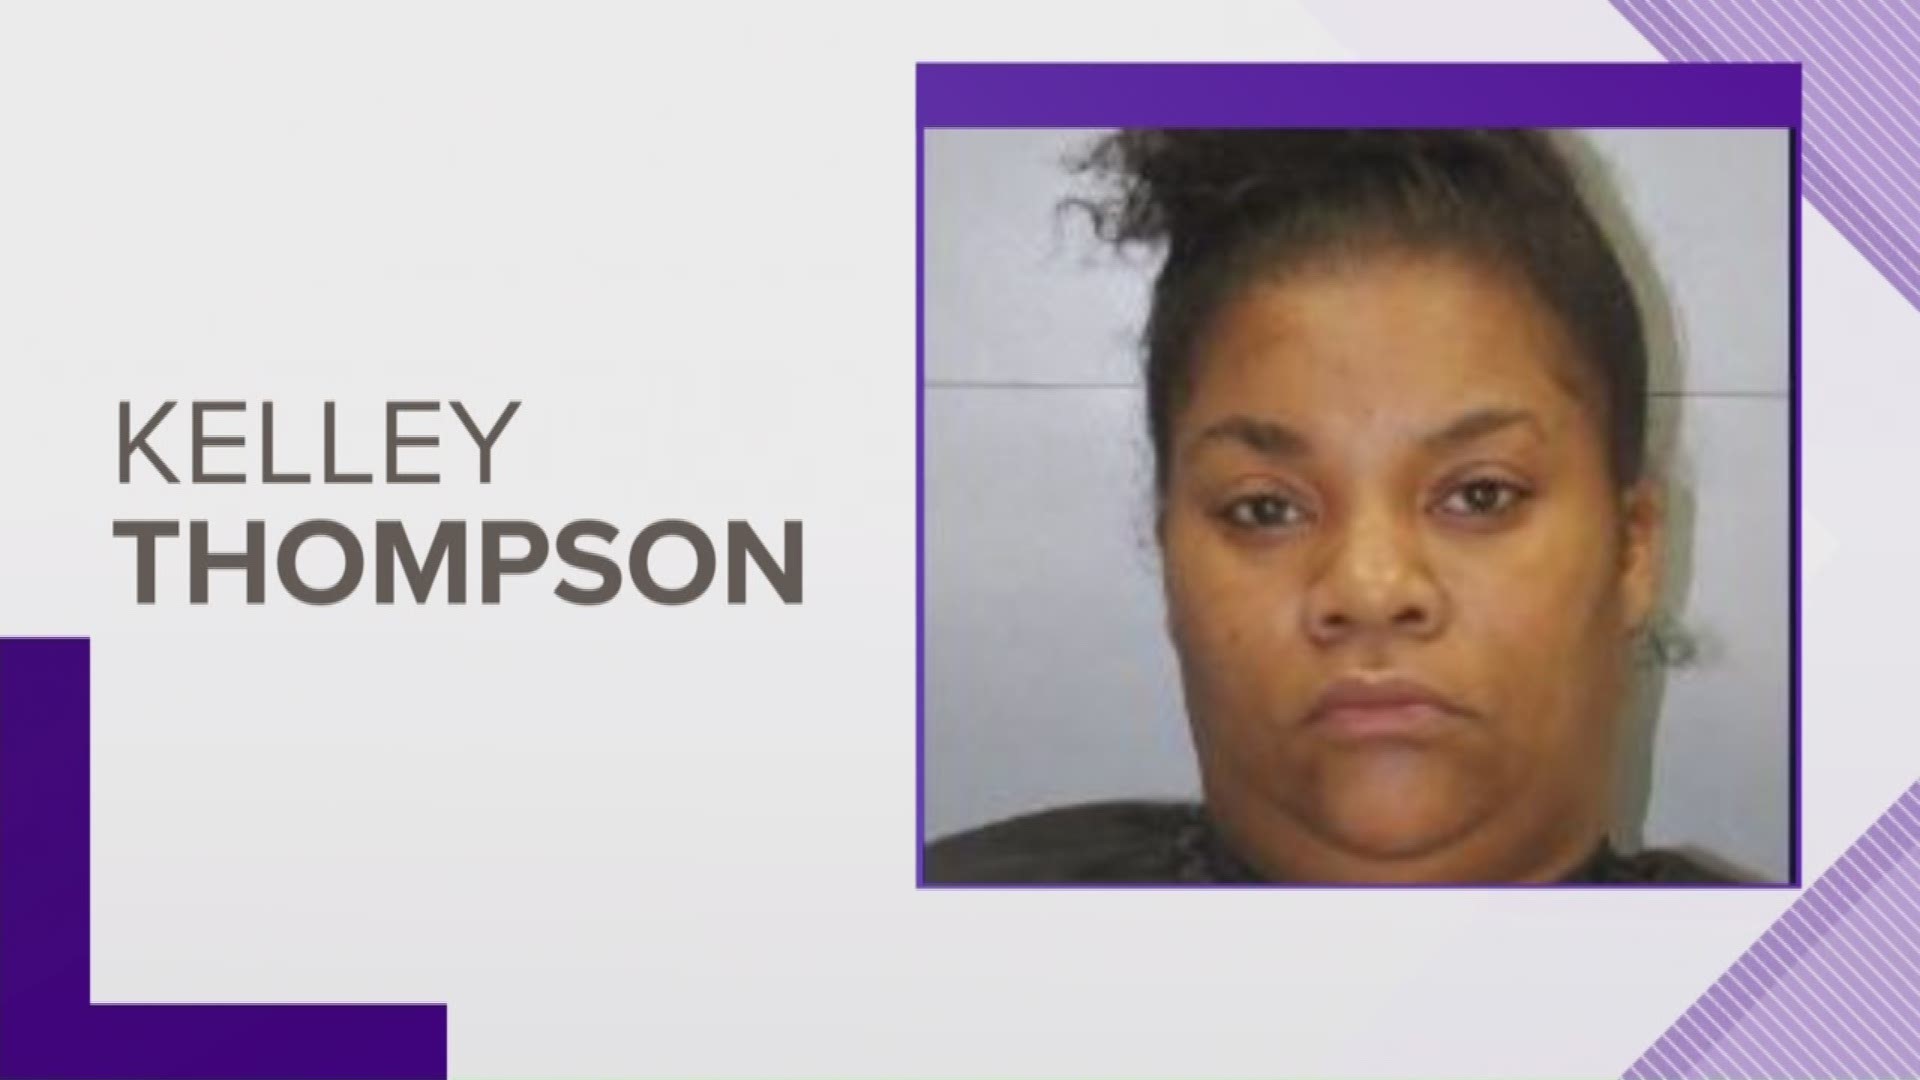 Officers say Kelley Thompson crashed into the Wellington Apartments on Greenlawn drive on Saturday